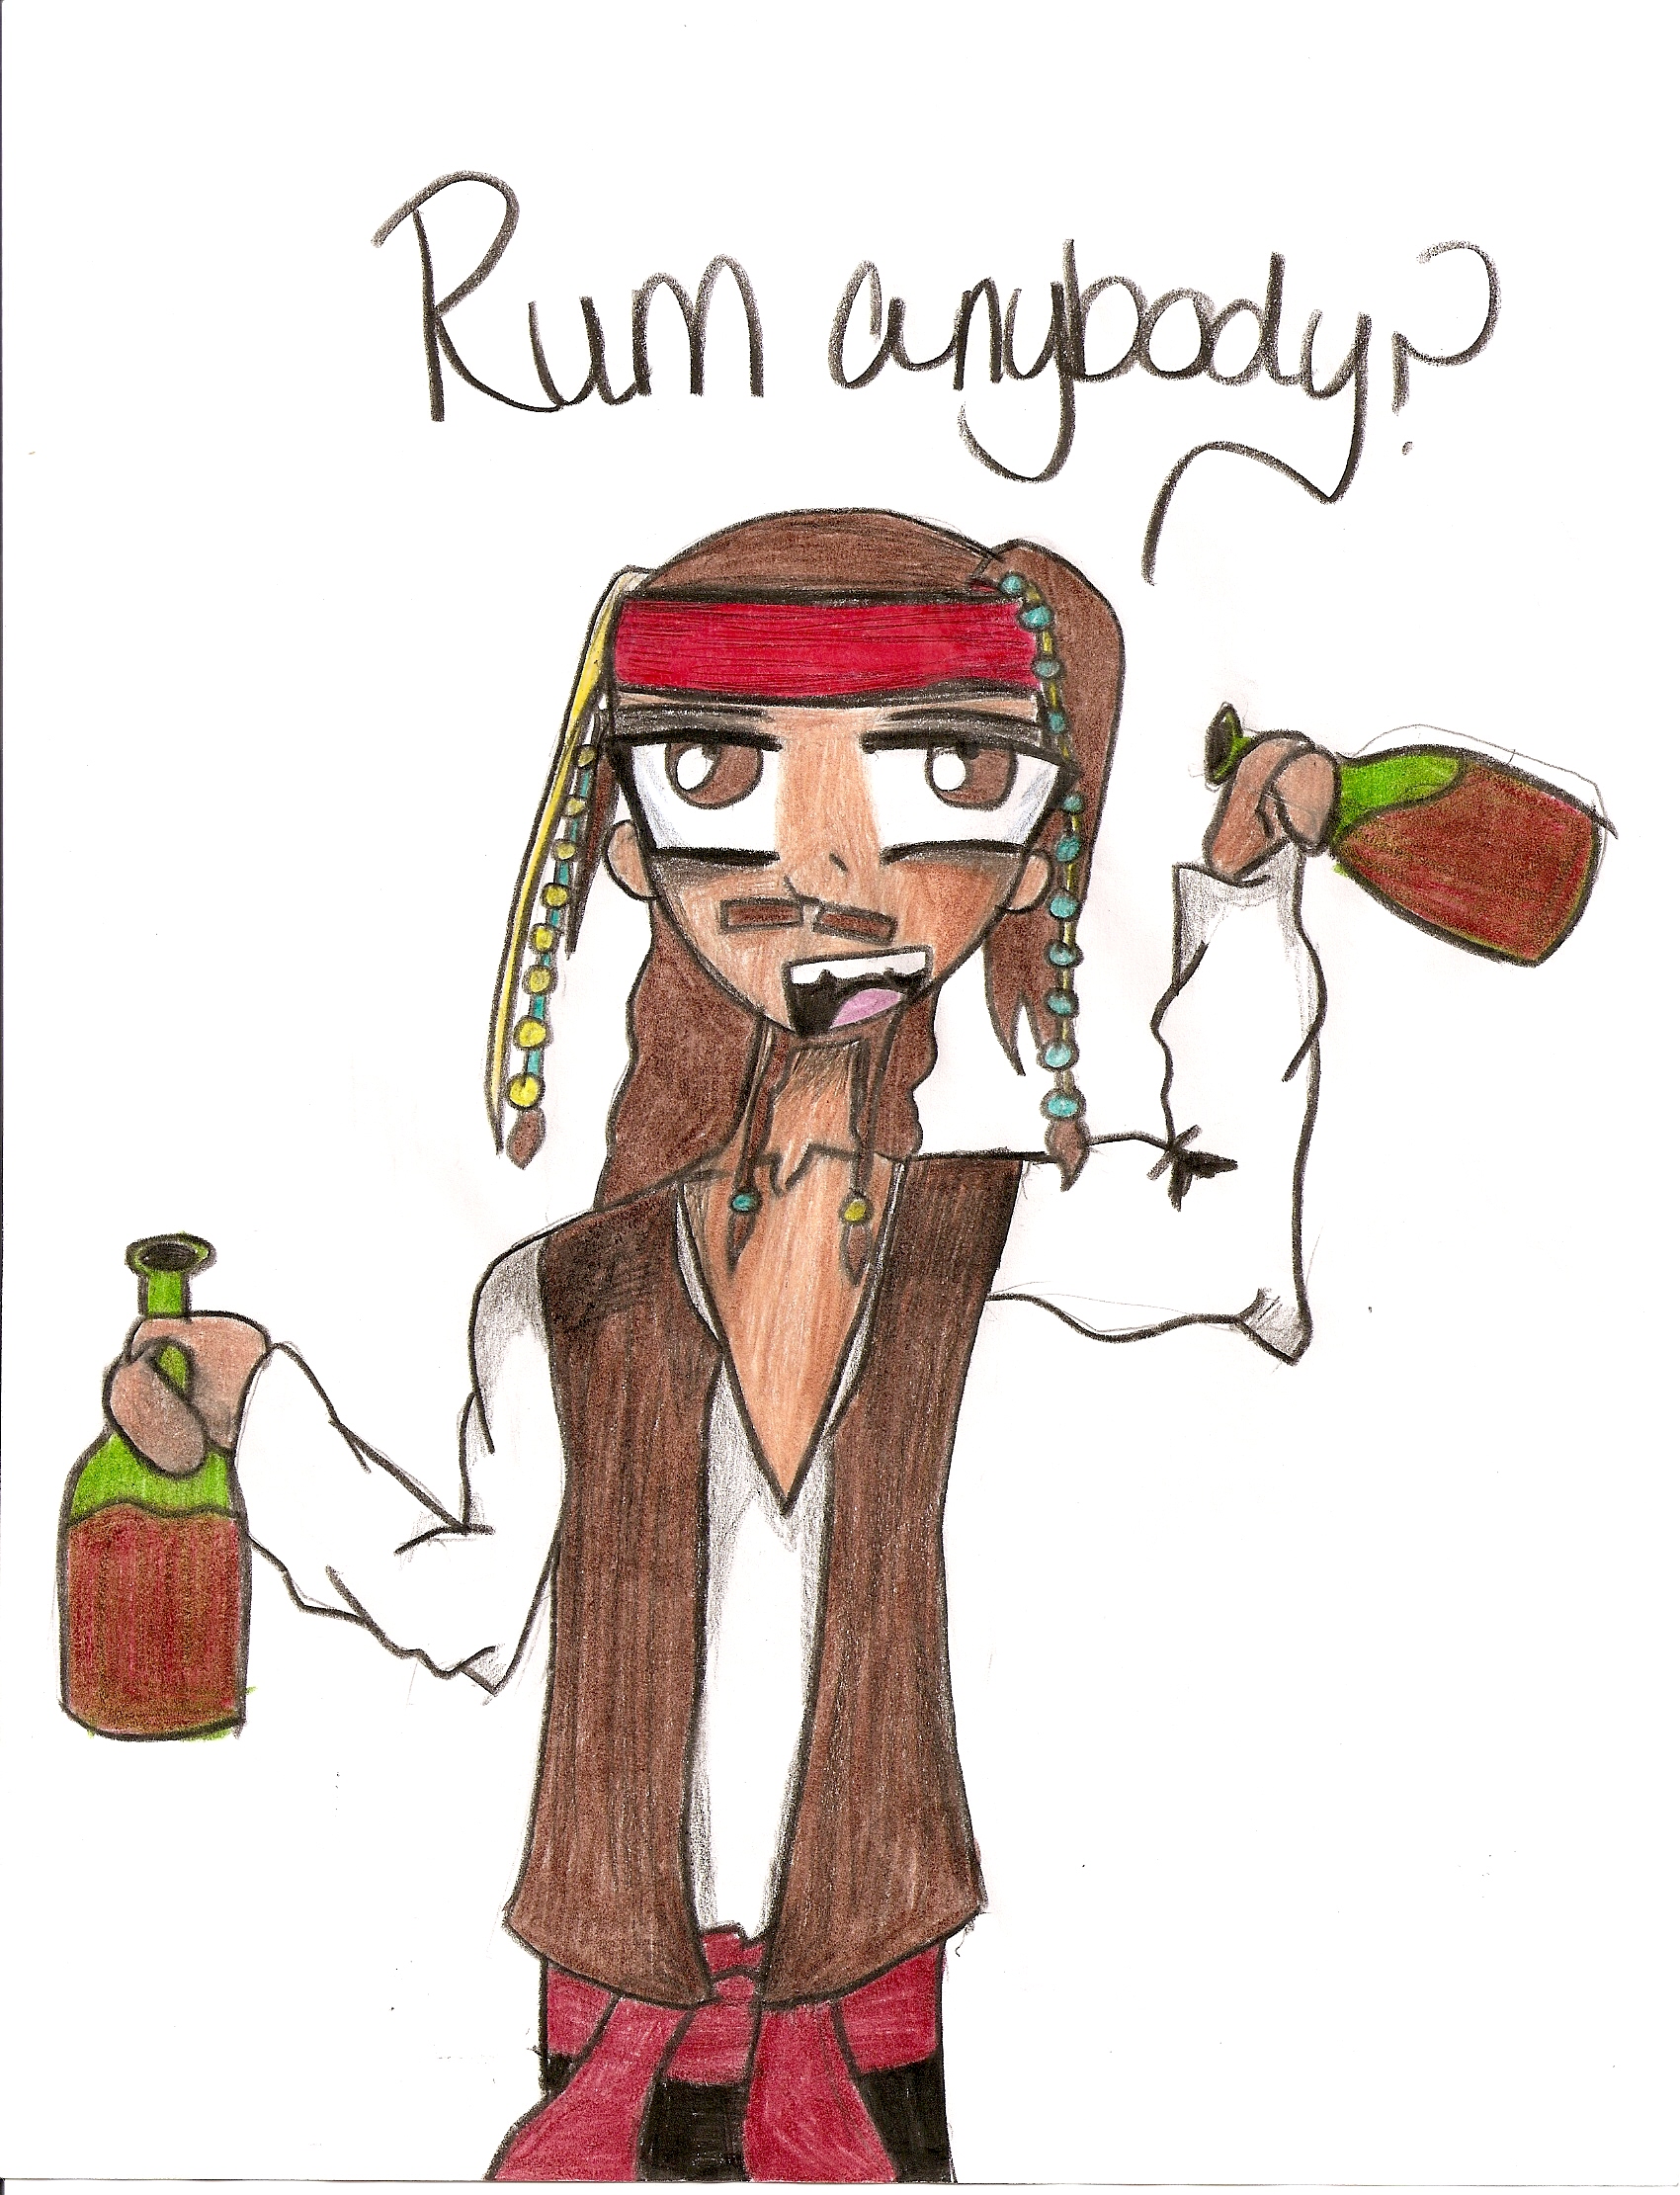 Rum anybody? by thehaunted